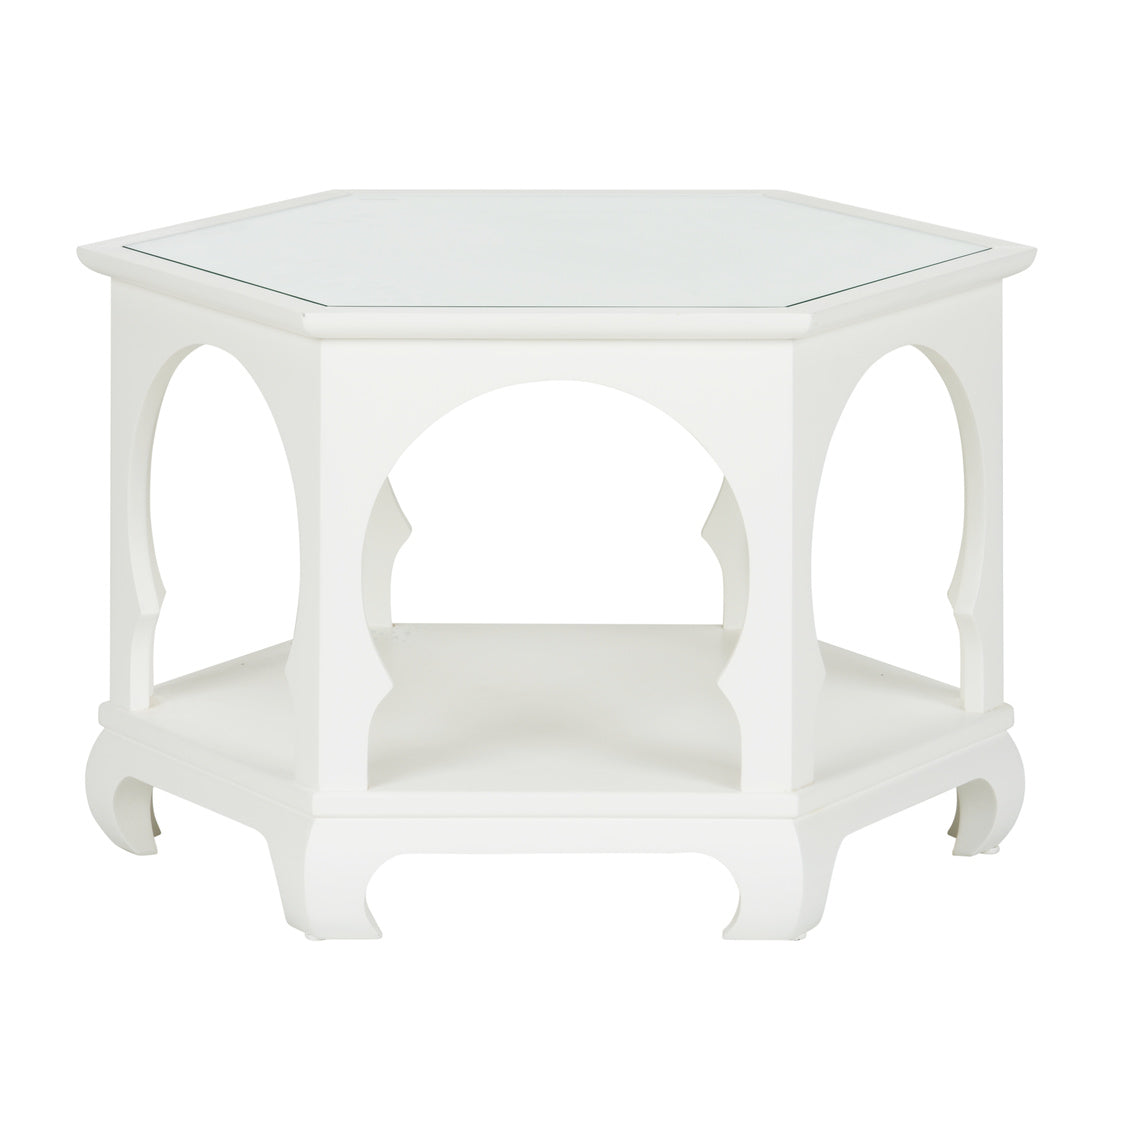 Moroccan Arch Table - Fairley Fancy